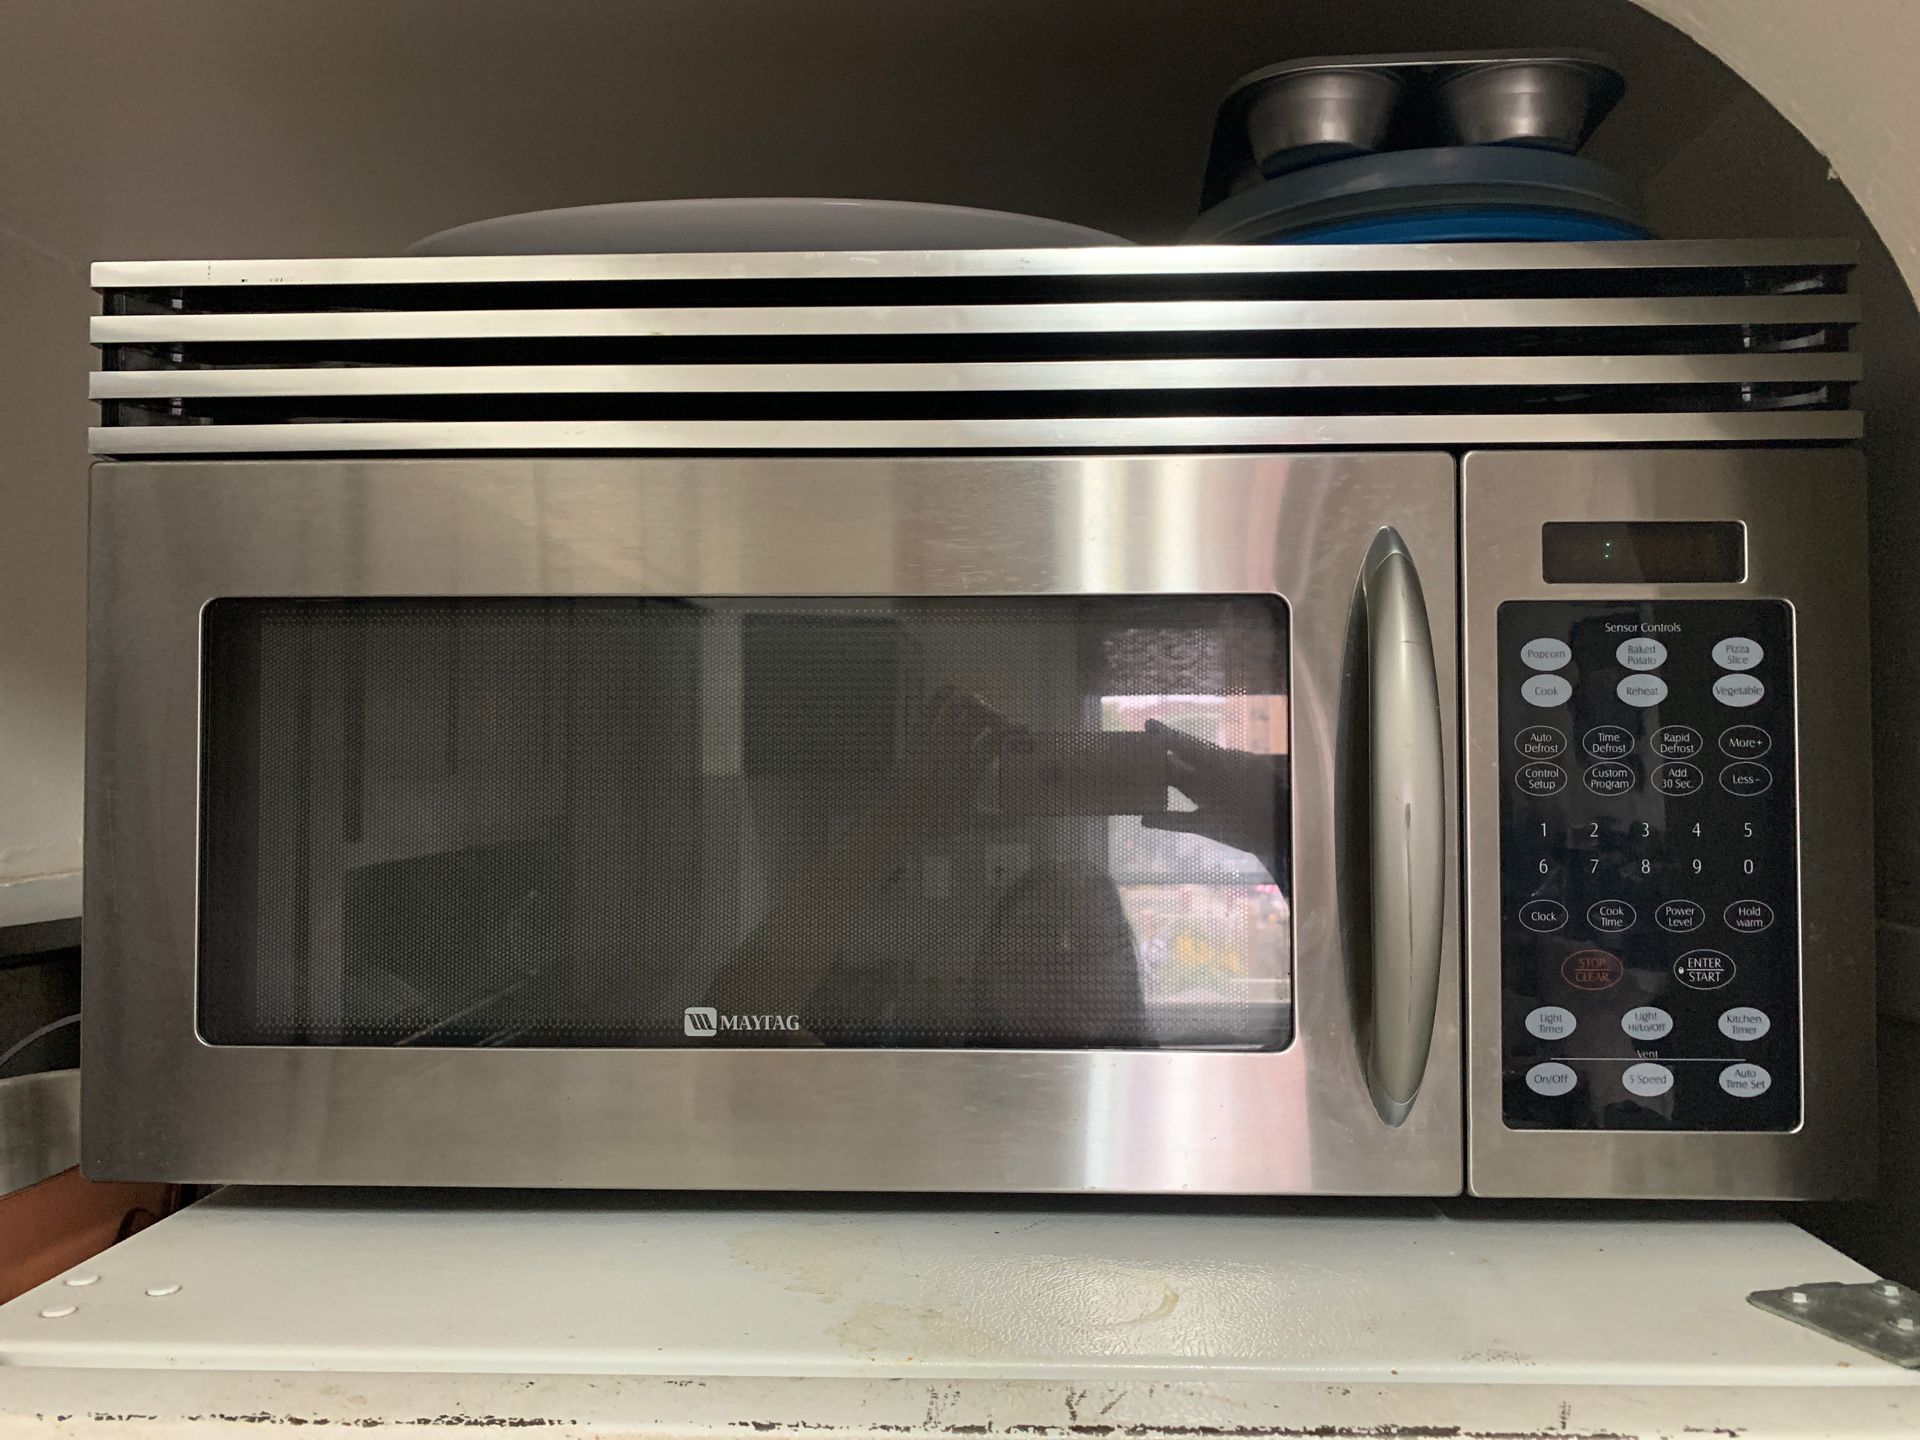 Microwave Metallic MAYTAG 30x16x16 with Vent